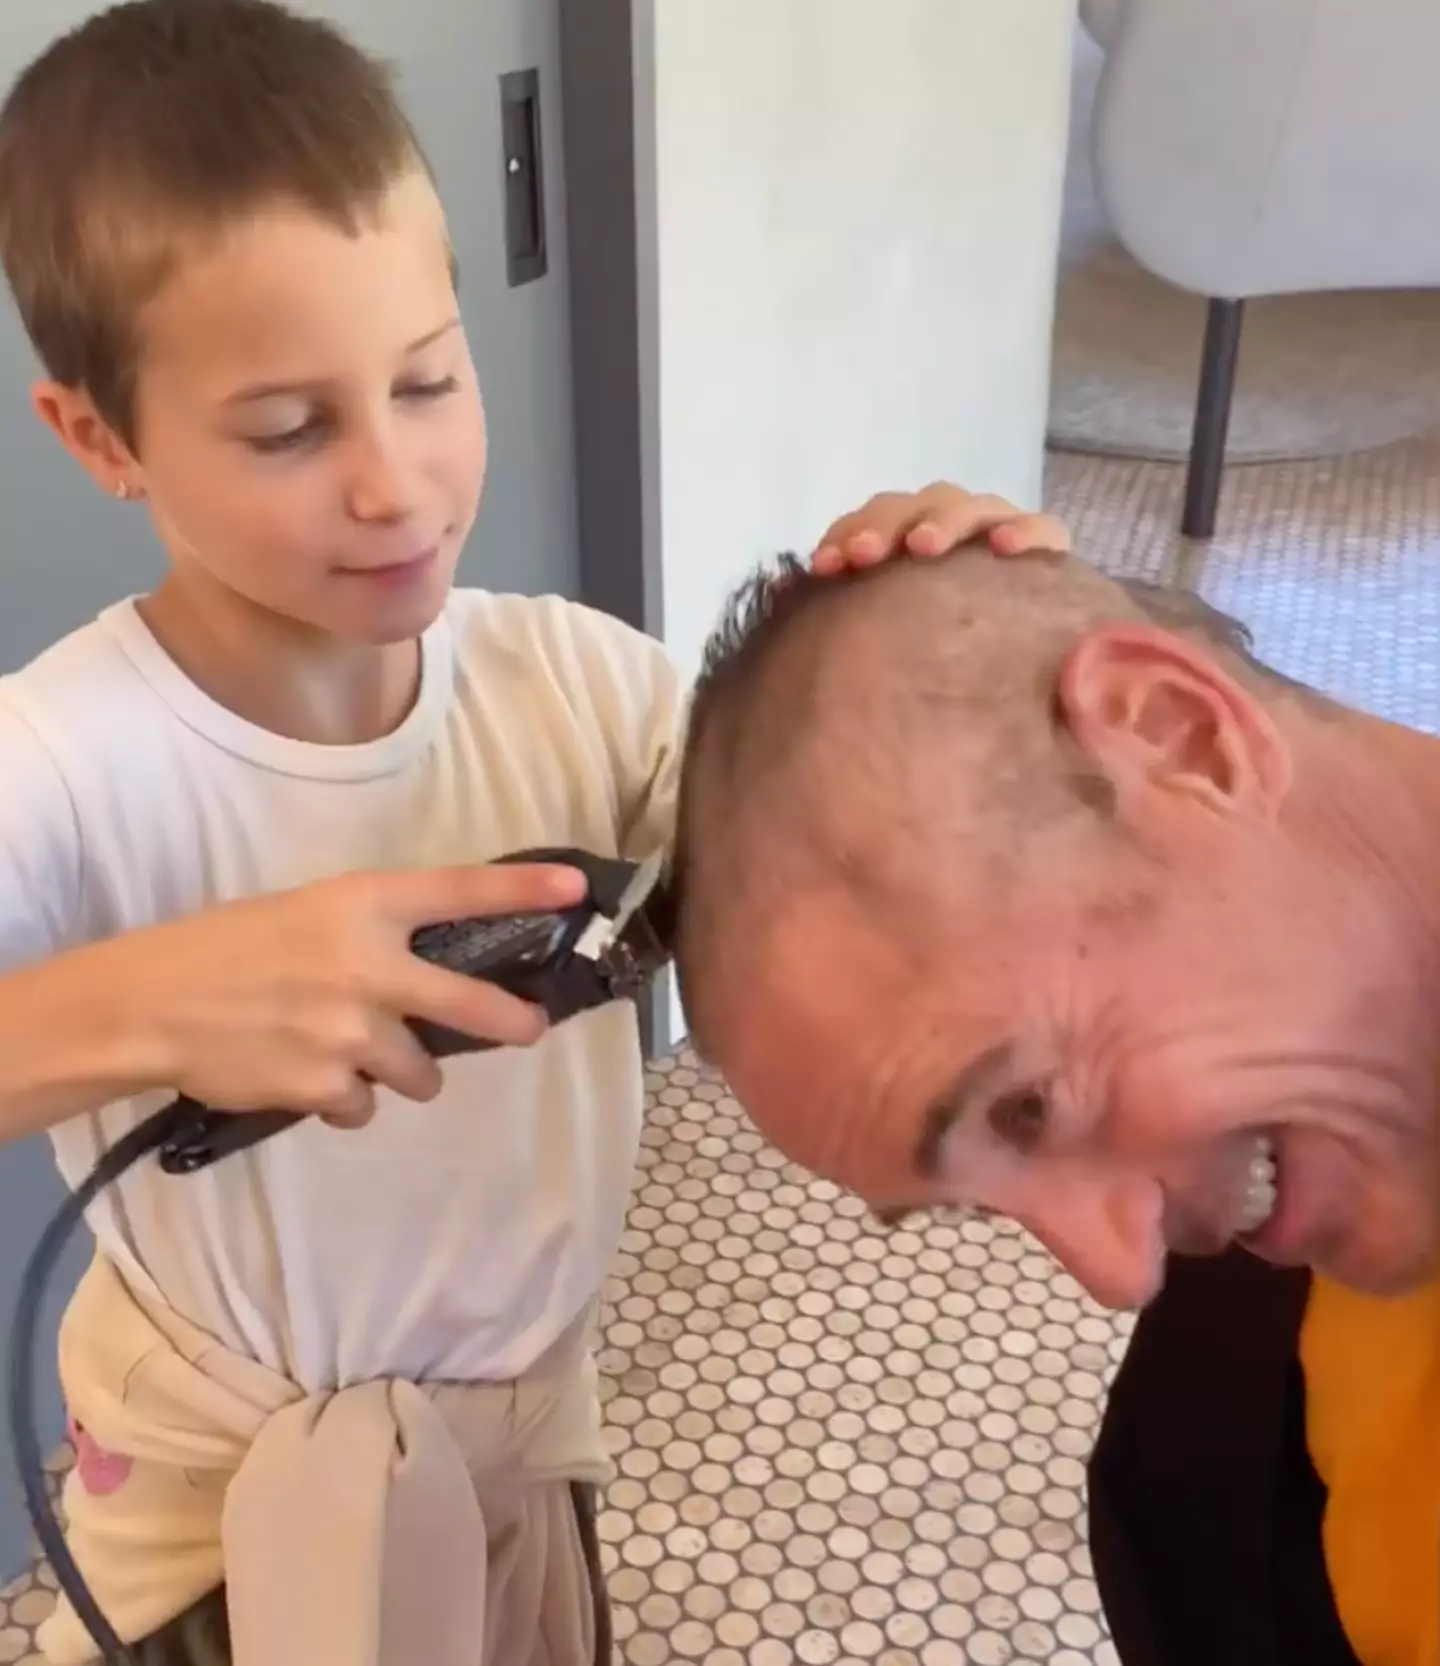 The kids were all too excited to shave Downey Jr.'s head.